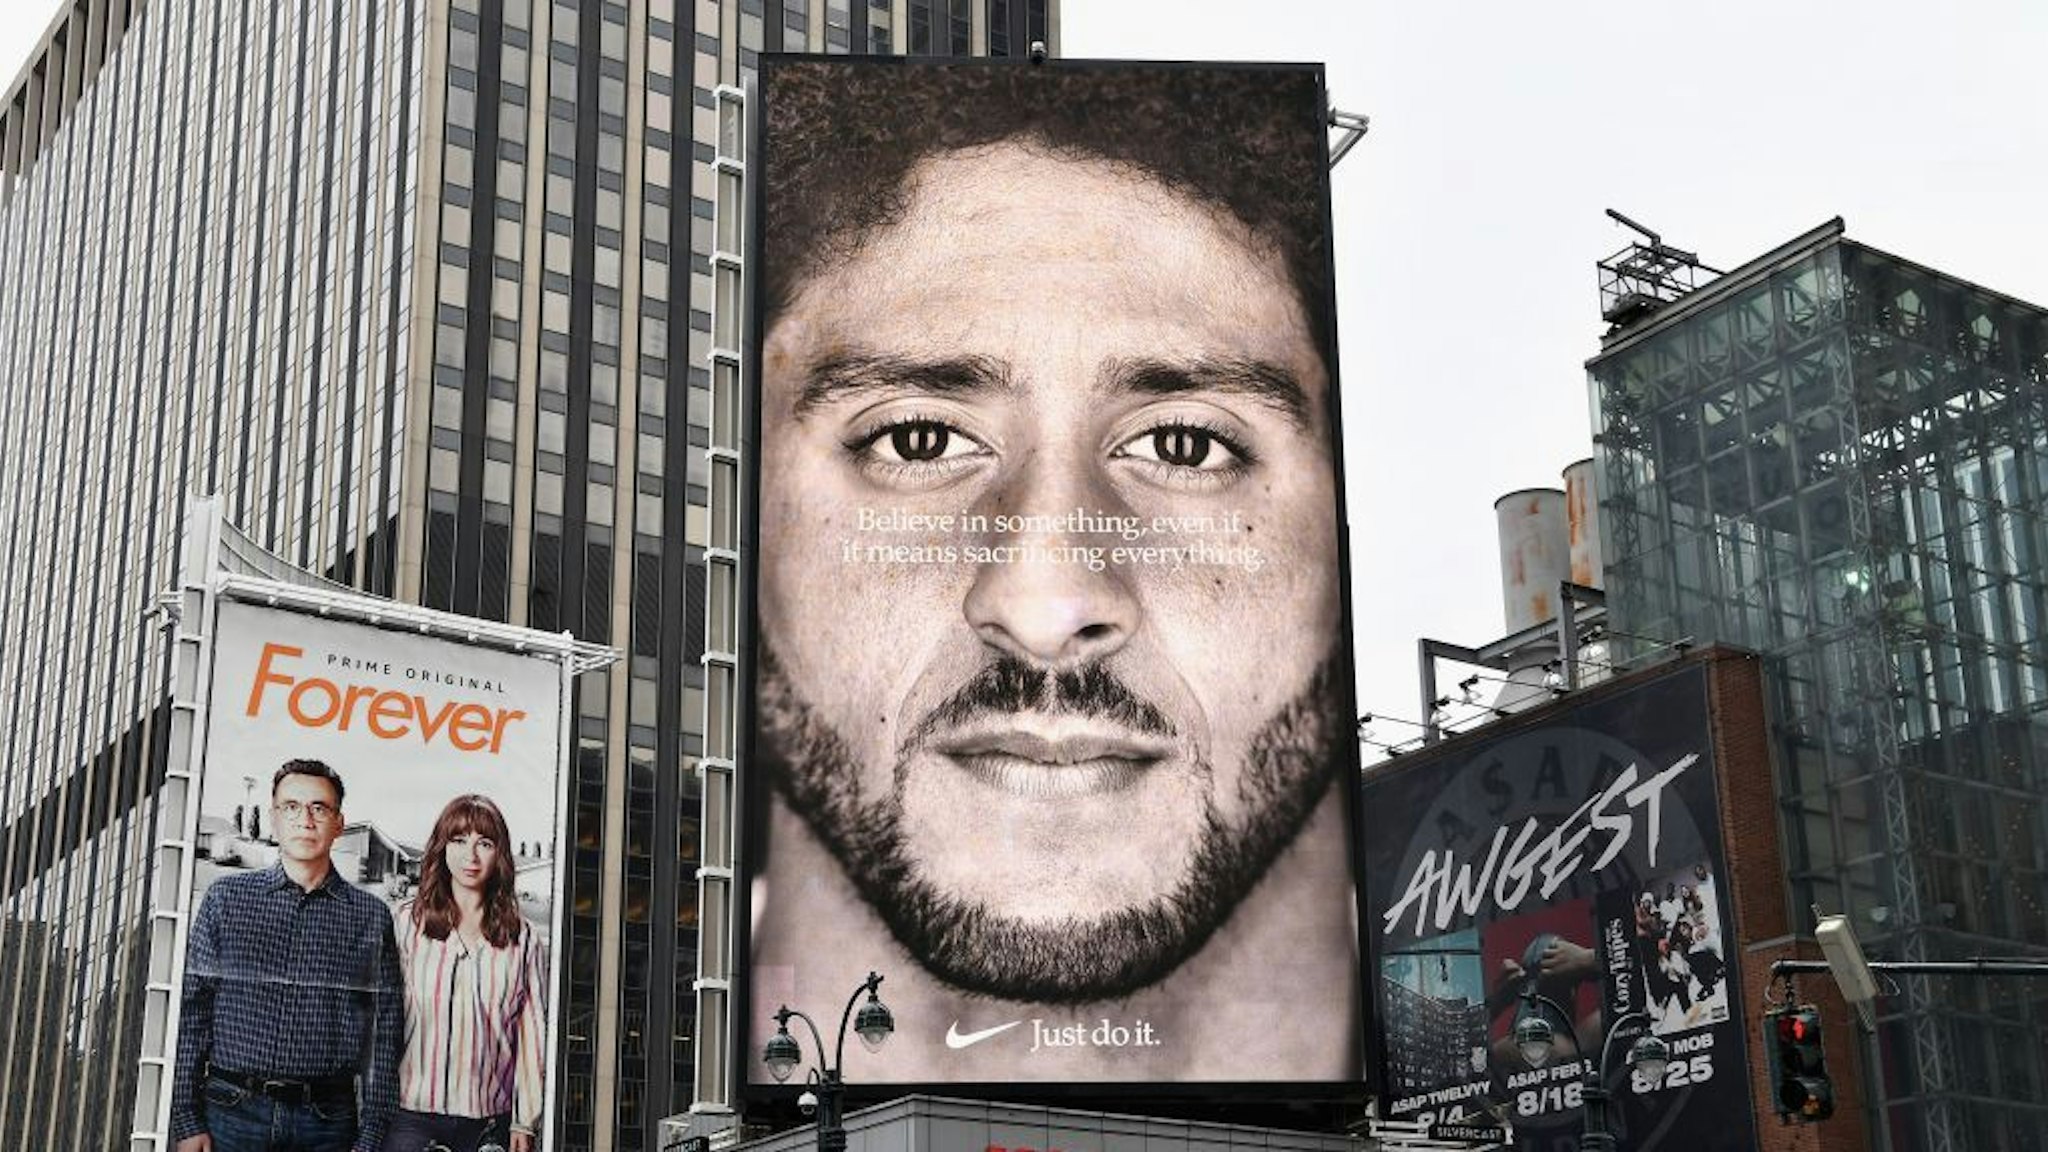 A Nike Ad featuring American football quarterback Colin Kaepernick is on diplay September 8, 2018 in New York City. - Nike's new ad campaign featuring Kaepernick, the American football player turned activist against police violence, takes a strong stance on a divisive issue which could score points with millennials but risks alienating conservative customers. The ads prompted immediate calls for Nike boycotts over Kaepernick, who has been castigated by US President Donald Trump and other conservatives over his kneeling protests during the playing of the US national anthem. (Photo by Angela Weiss / AFP) (Photo credit should read ANGELA WEISS/AFP via Getty Images)